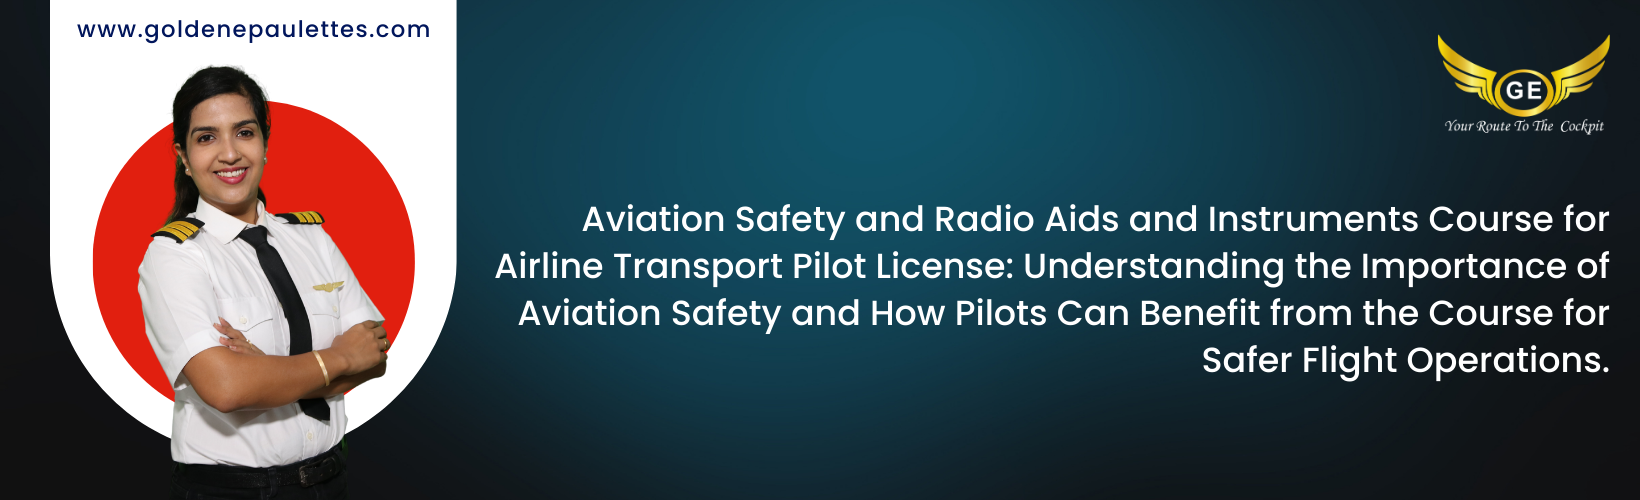 Air Traffic Control and Radio Aids and Instruments Course in Airline Transport Pilot License